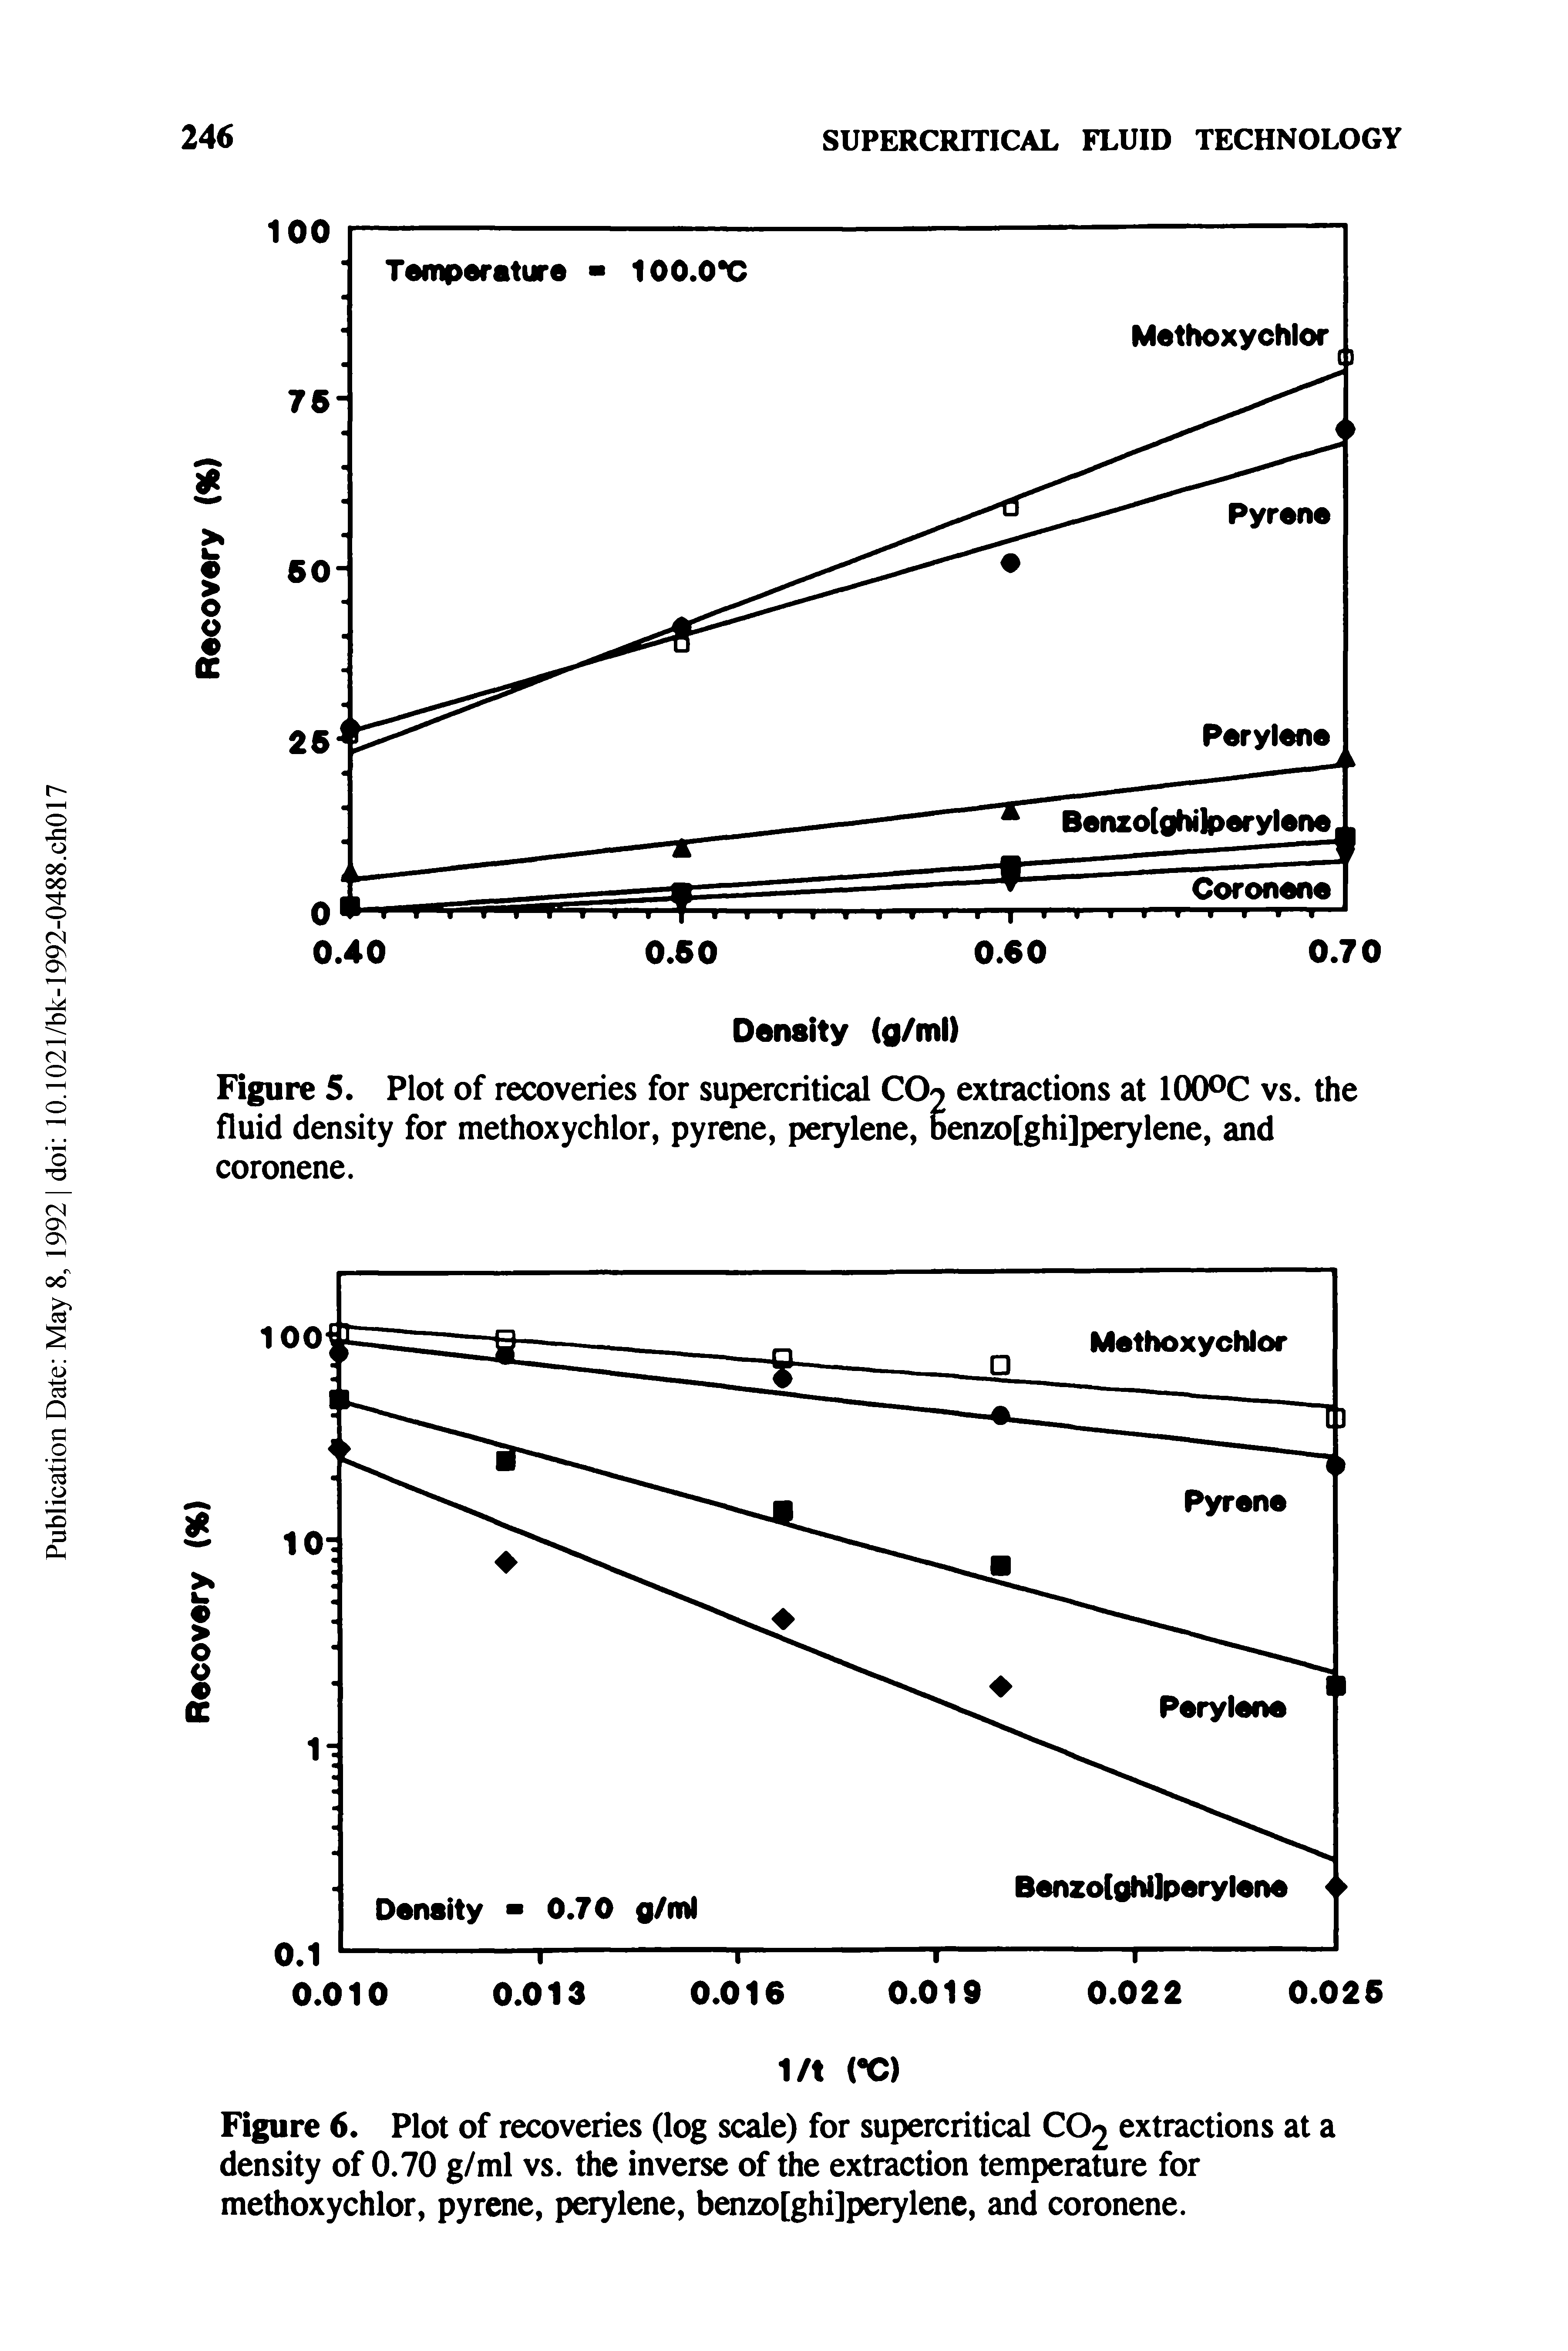 Figure 6. Plot of recoveries (log scale) for supercritical CO2 extractions at a density of 0.70 g/ml vs. the inverse of the extraction temperature for methoxychlor, pyrene, perylene, benzo[ghi]perylene, and coronene.